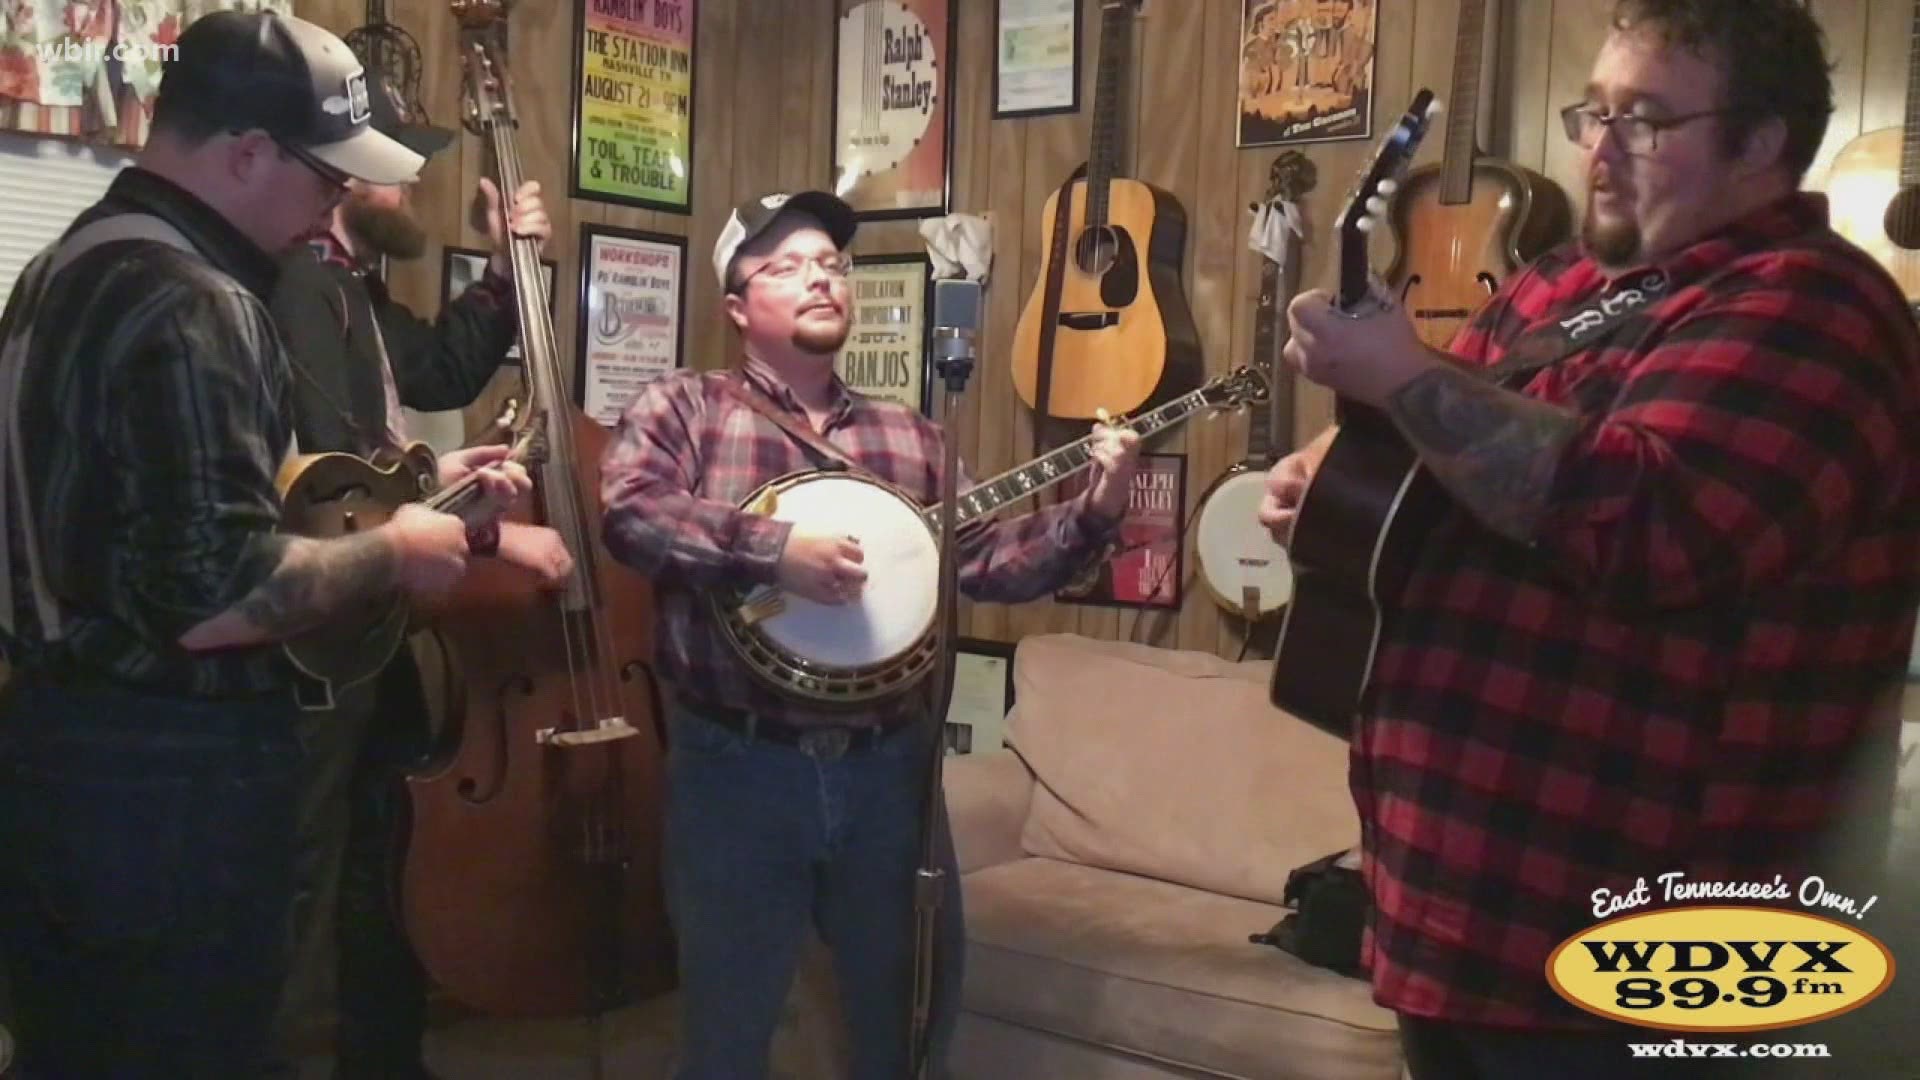 WDVX's "Live from Home" featuring the Po' Ramblin' Boys is January 8 at 7pm. For tickets visit wdvx.com. January 7, 2021-4pm.